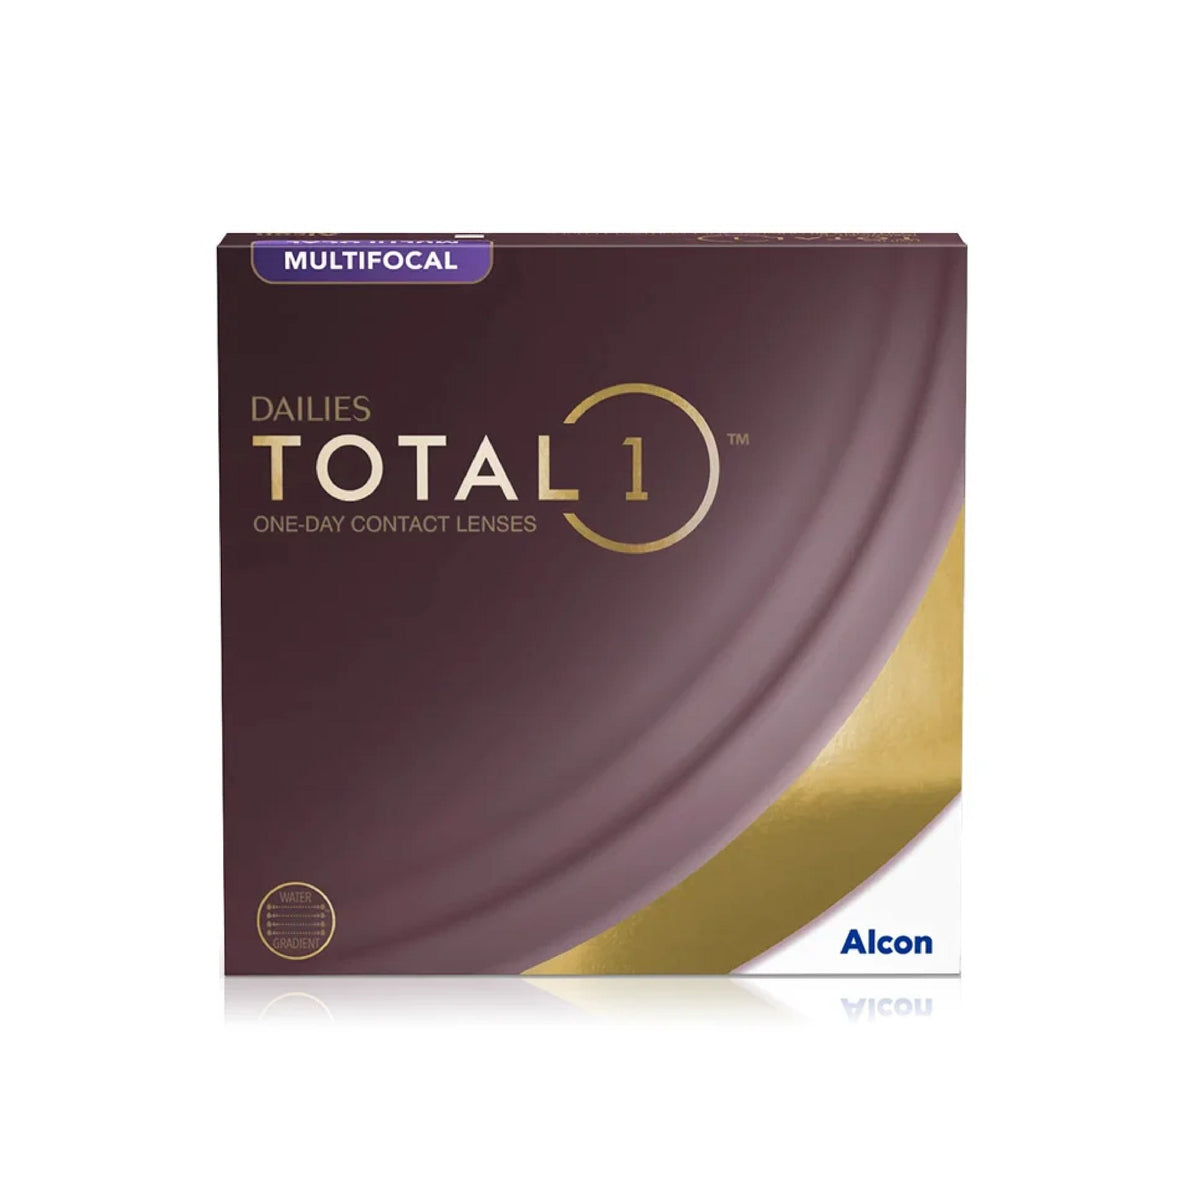 Dailies Total 1 Multifocal 90 Contact Lenses Alcon   